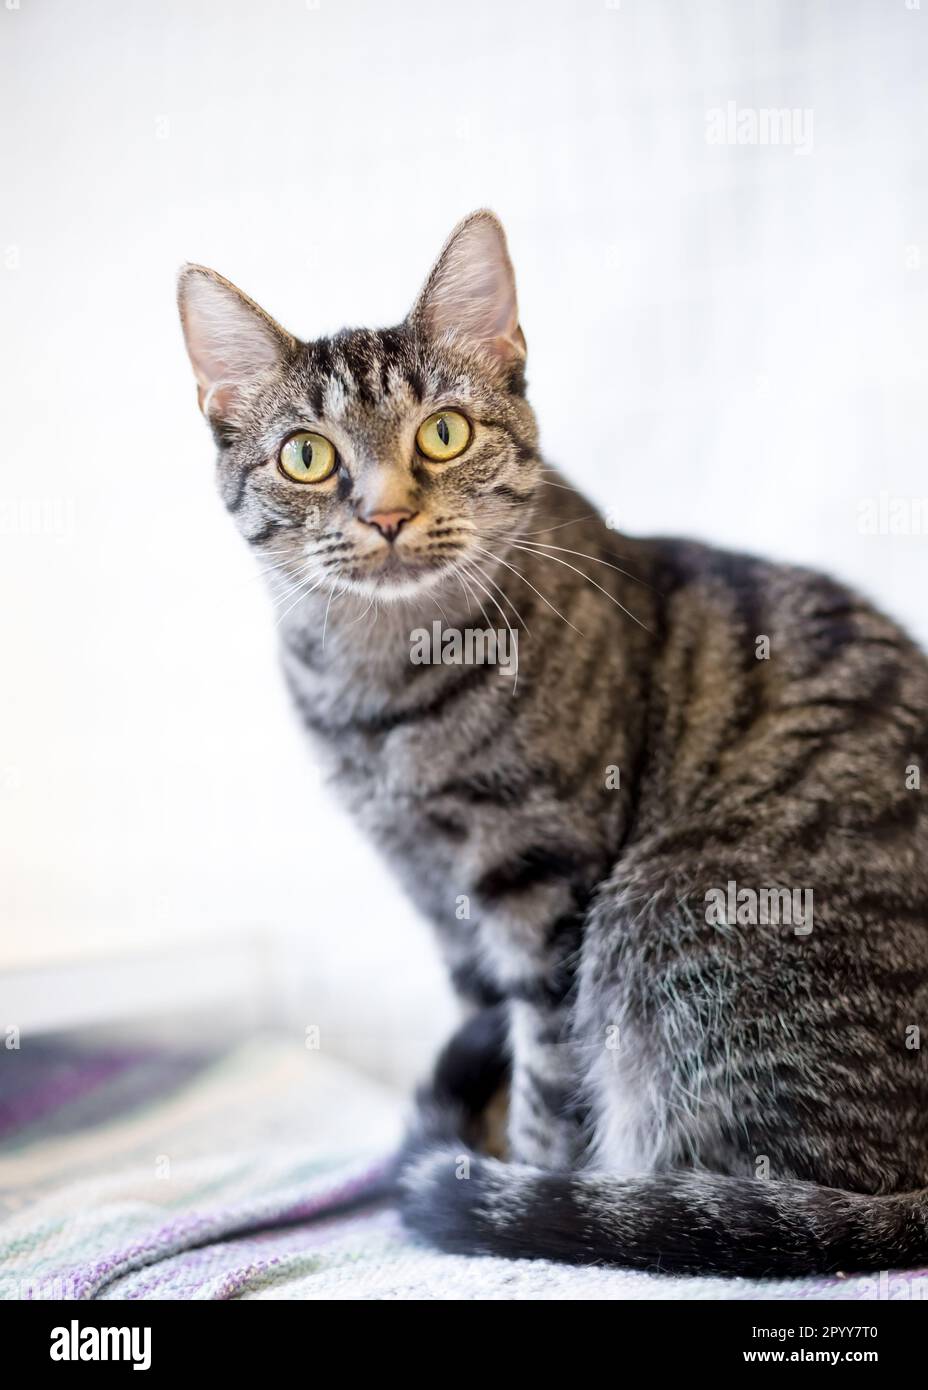 A wide-eyed shorthair tabby cat sitting and looking at the camera Stock Photo